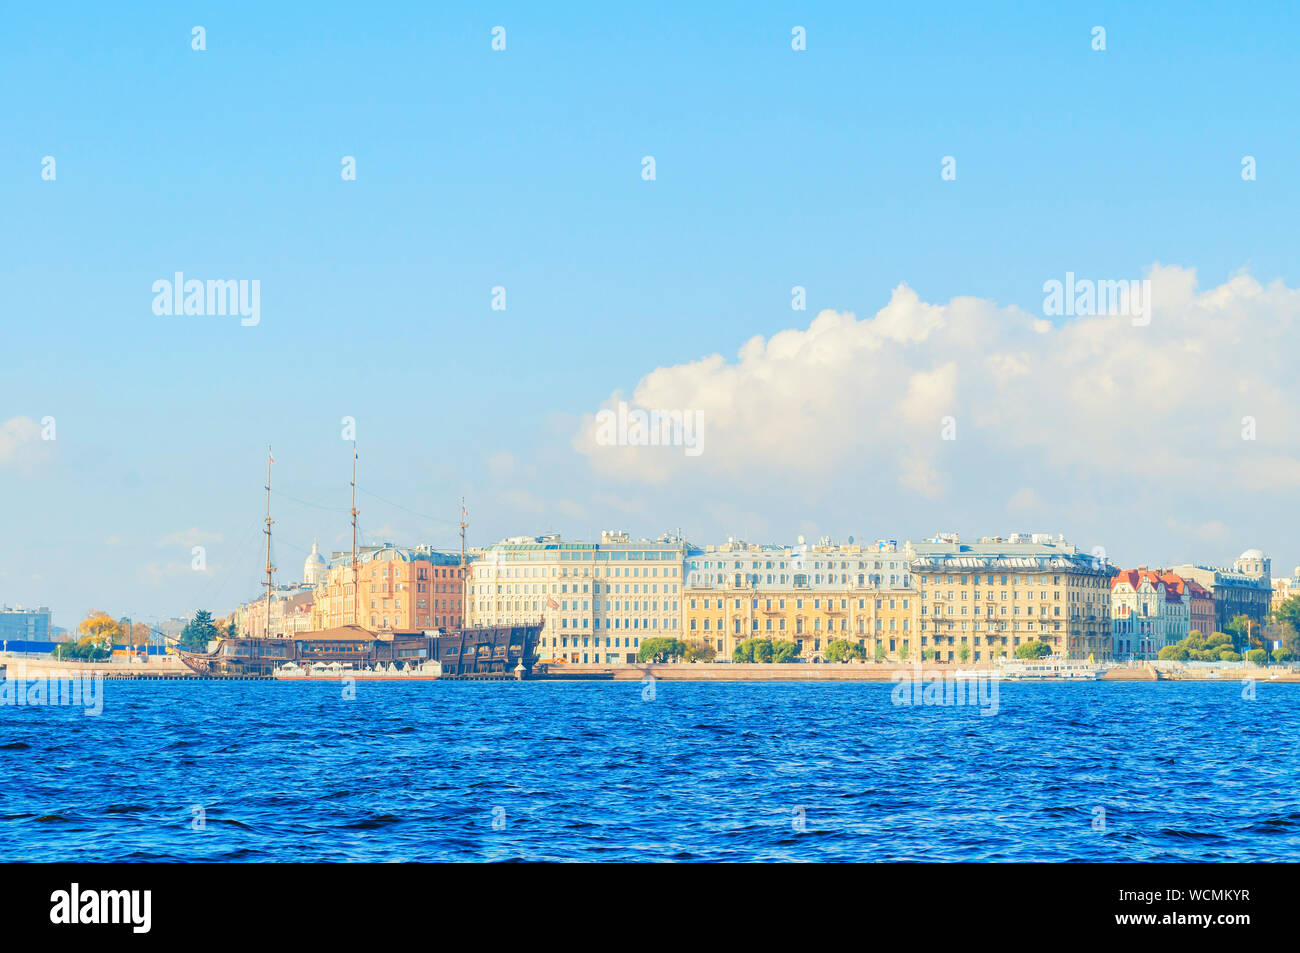 St Petersburg, Russia -October 3, 2016. Mytninskaya embankment and city buildings near the Neva river with Flying Dutchman - the restaurant on the wat Stock Photo